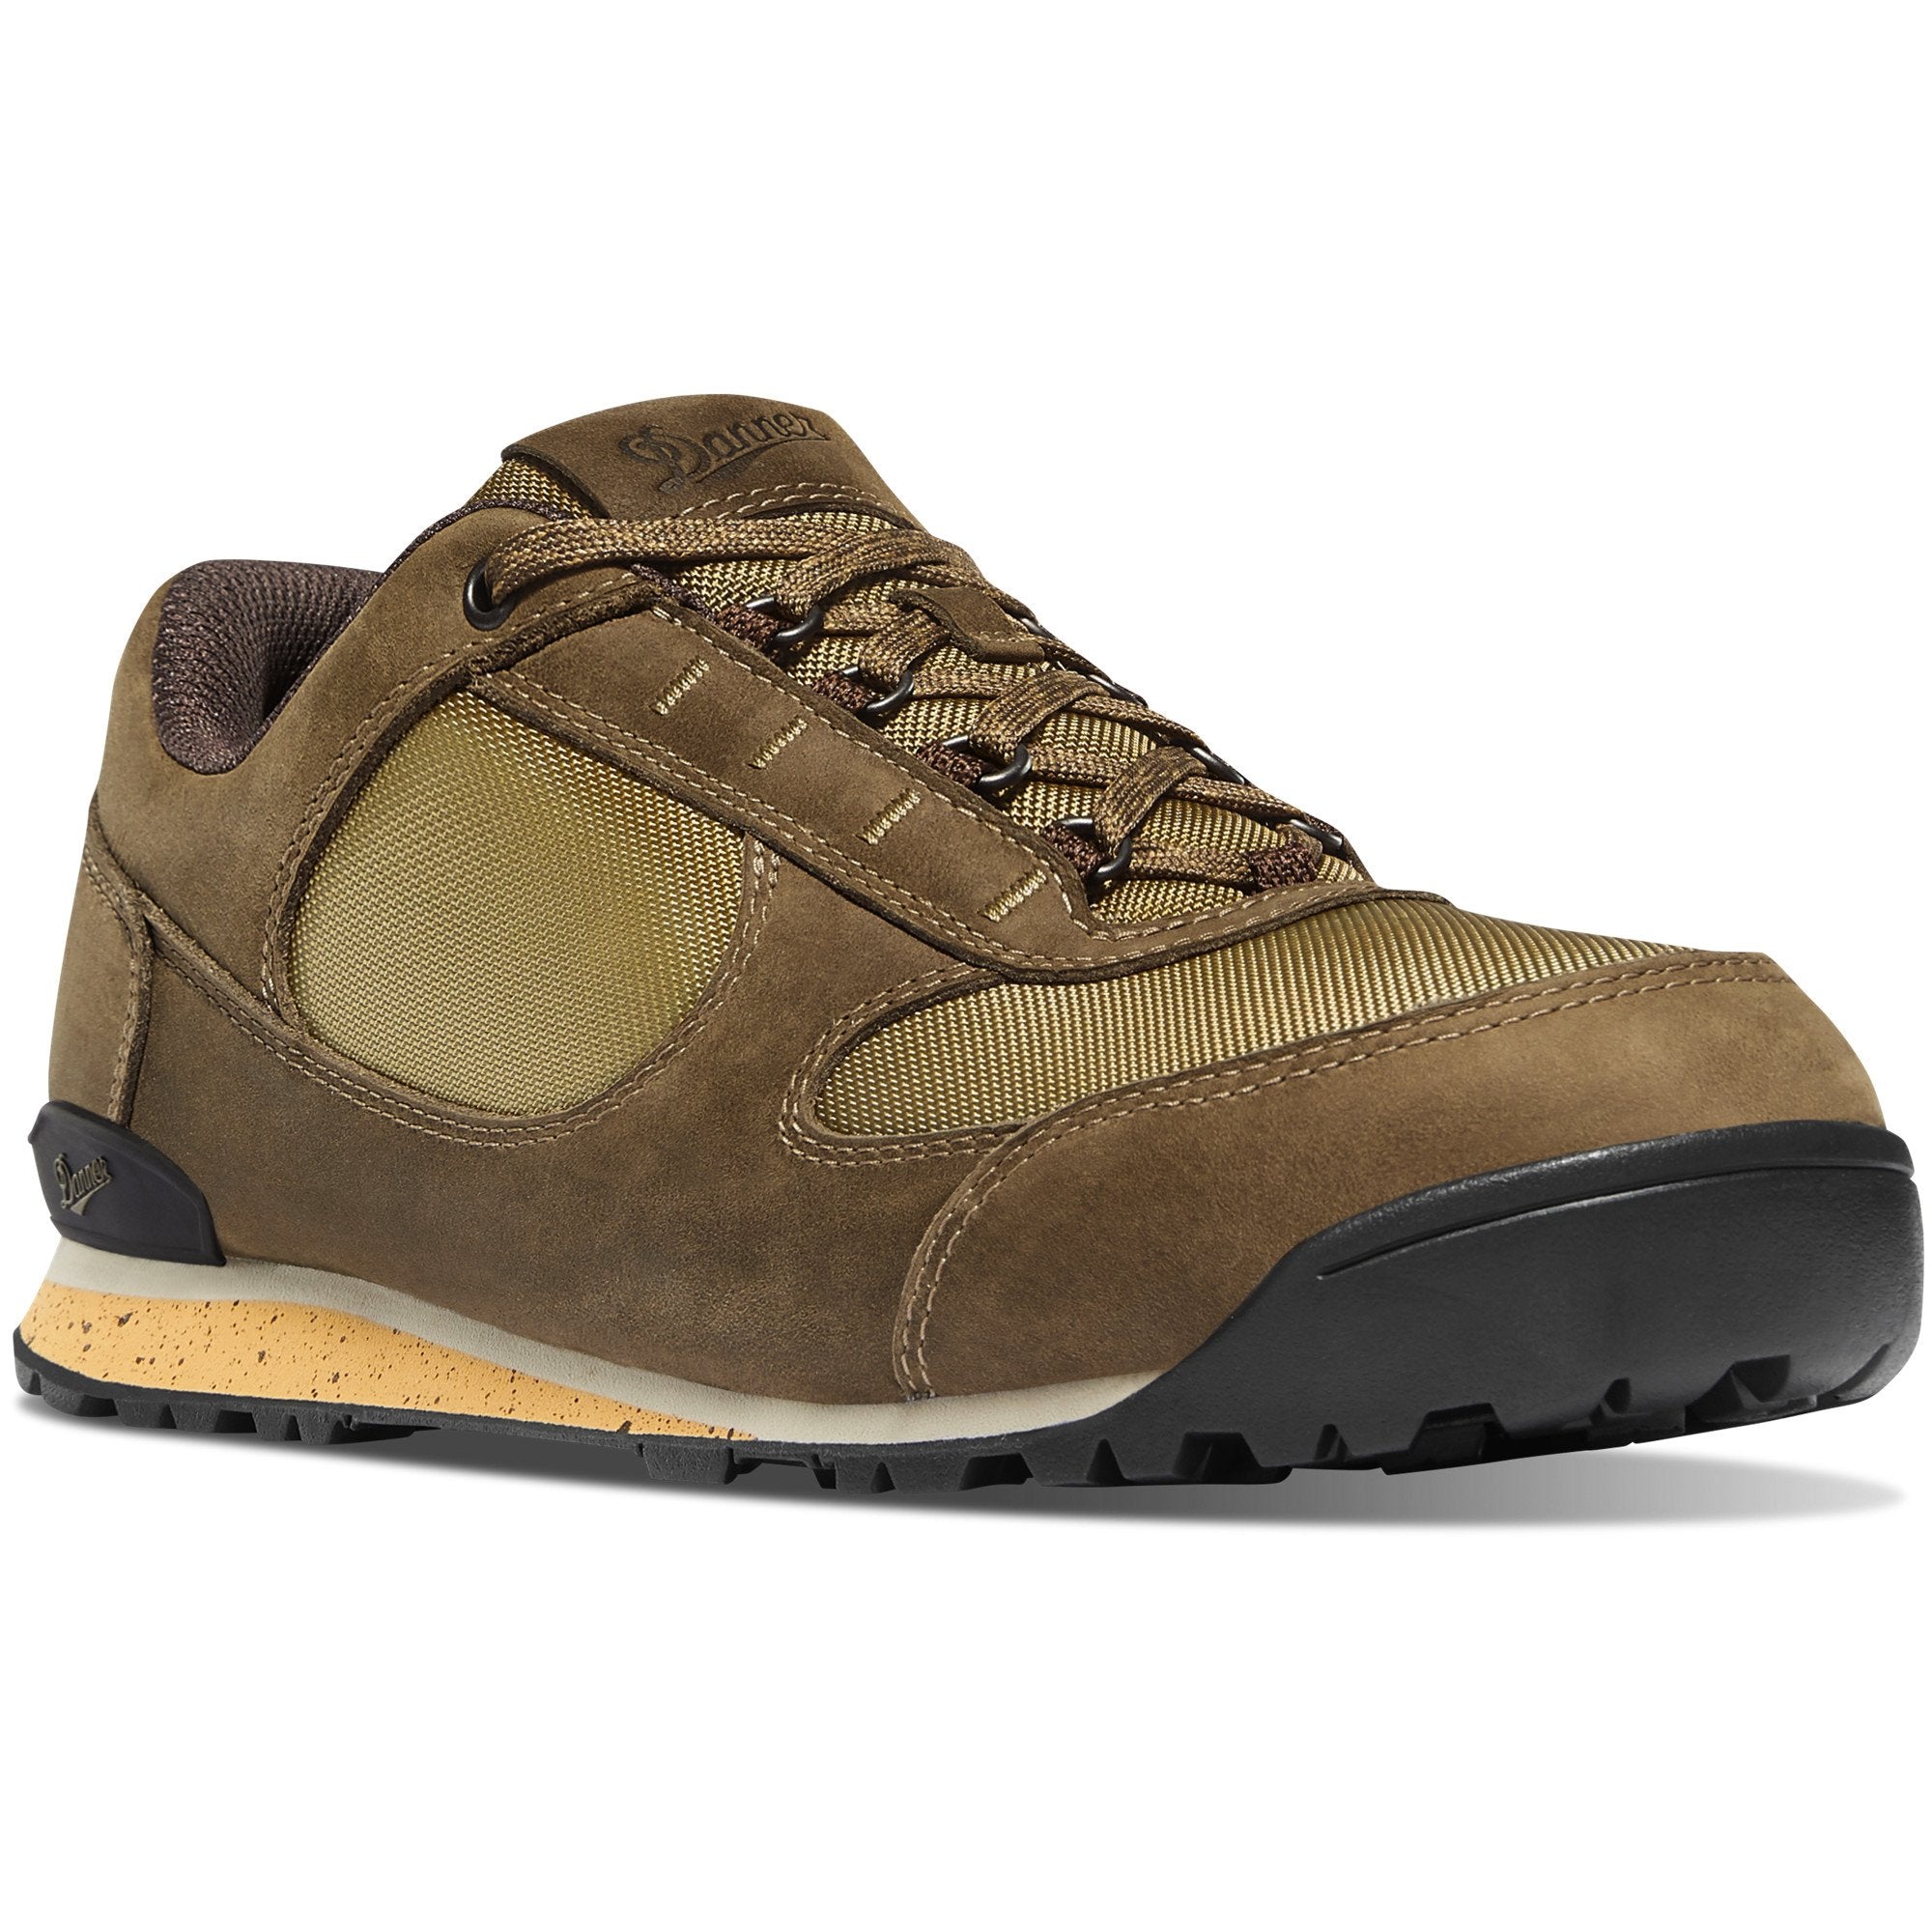 Danner Men's Jag Low 3" Hiking Shoe in Brown/Summer Wheat from the side